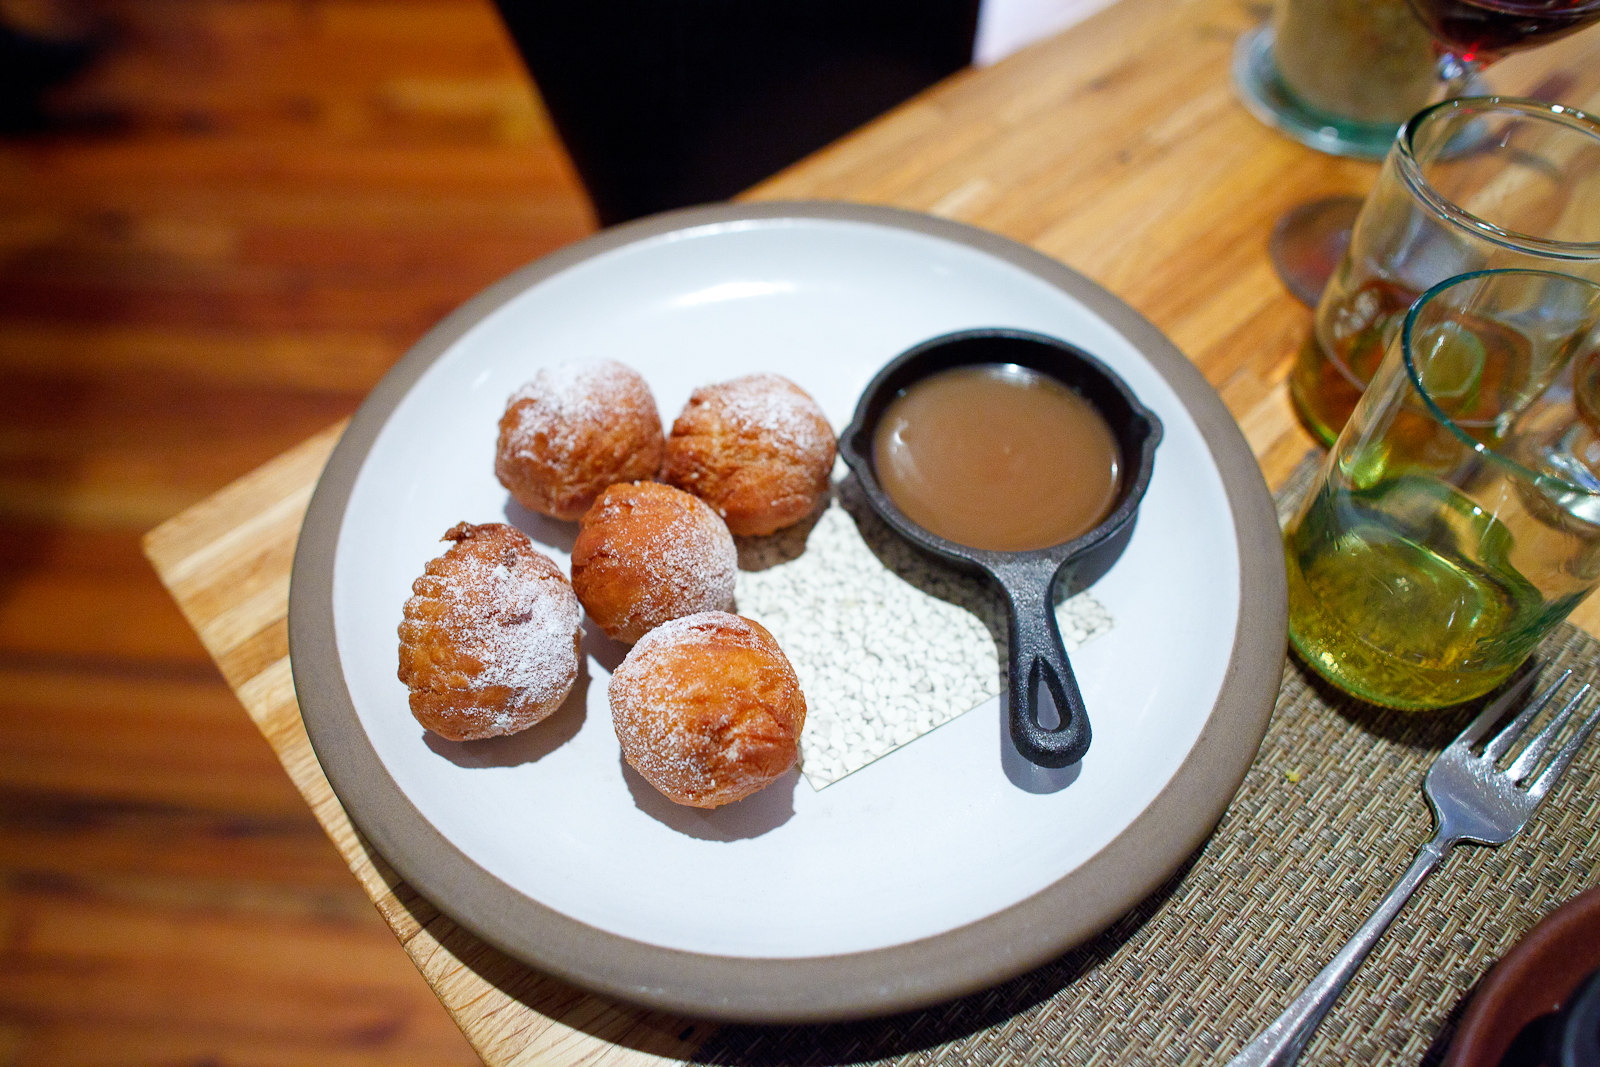 14th Course: Donut holes